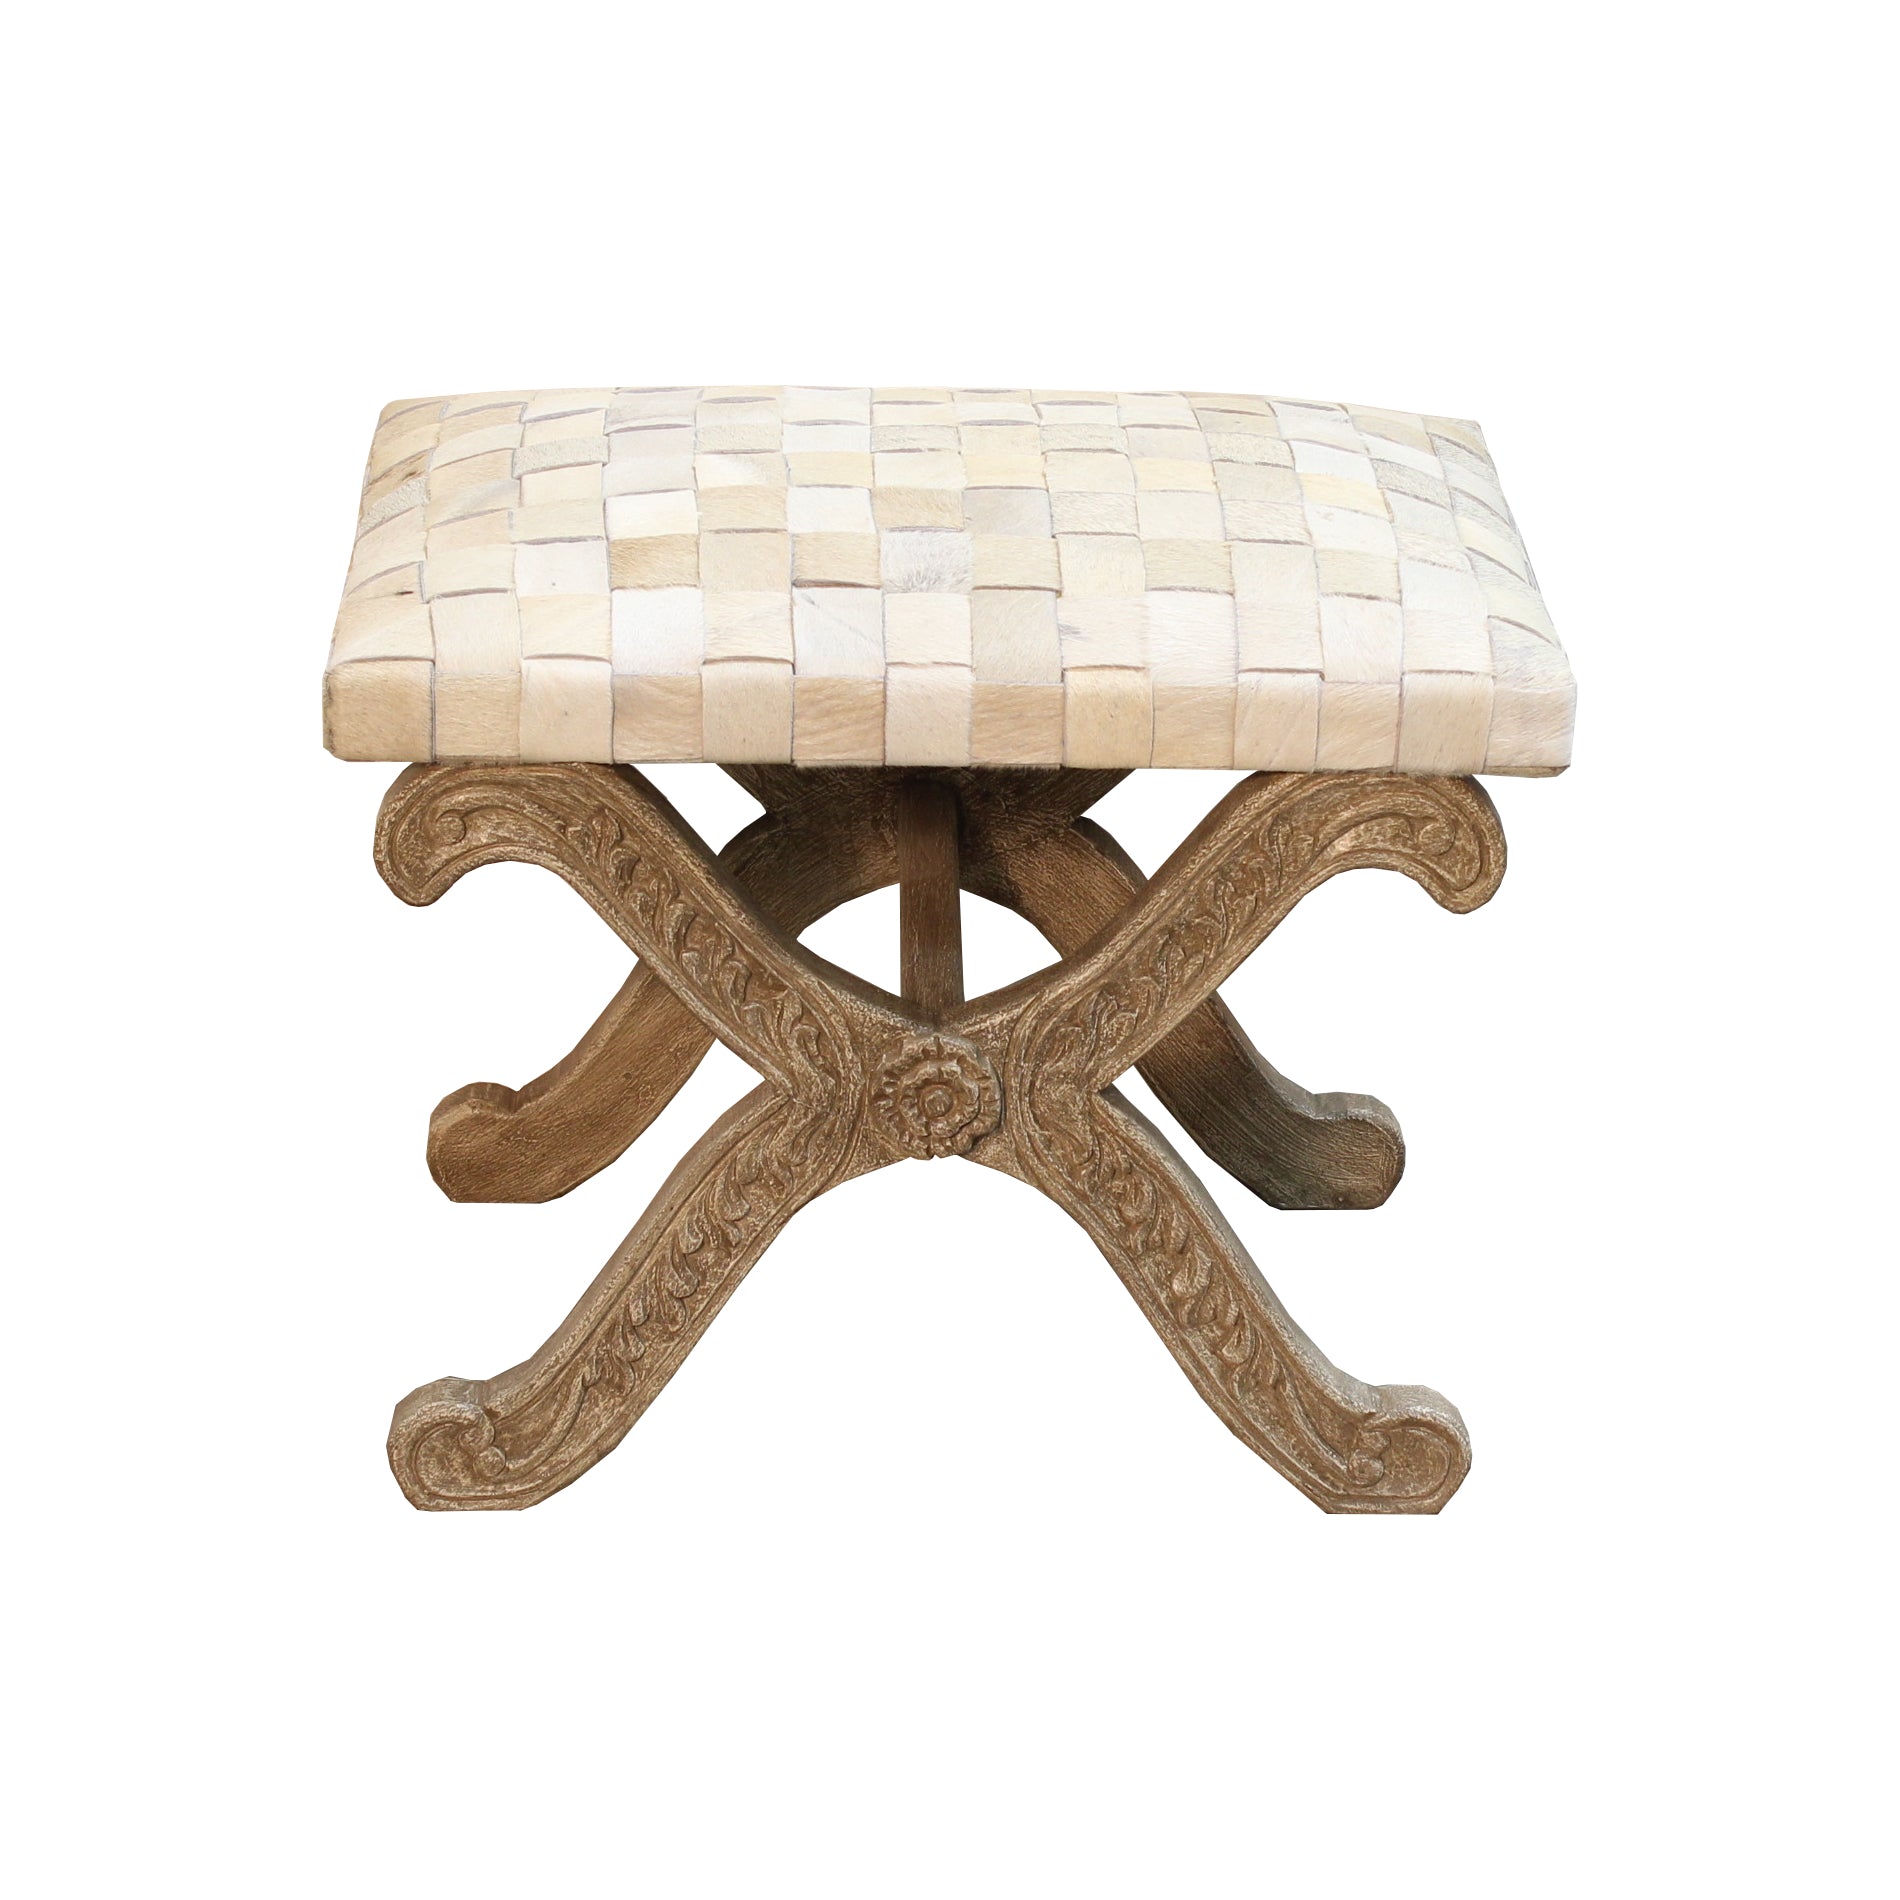 Carved Equis Stool